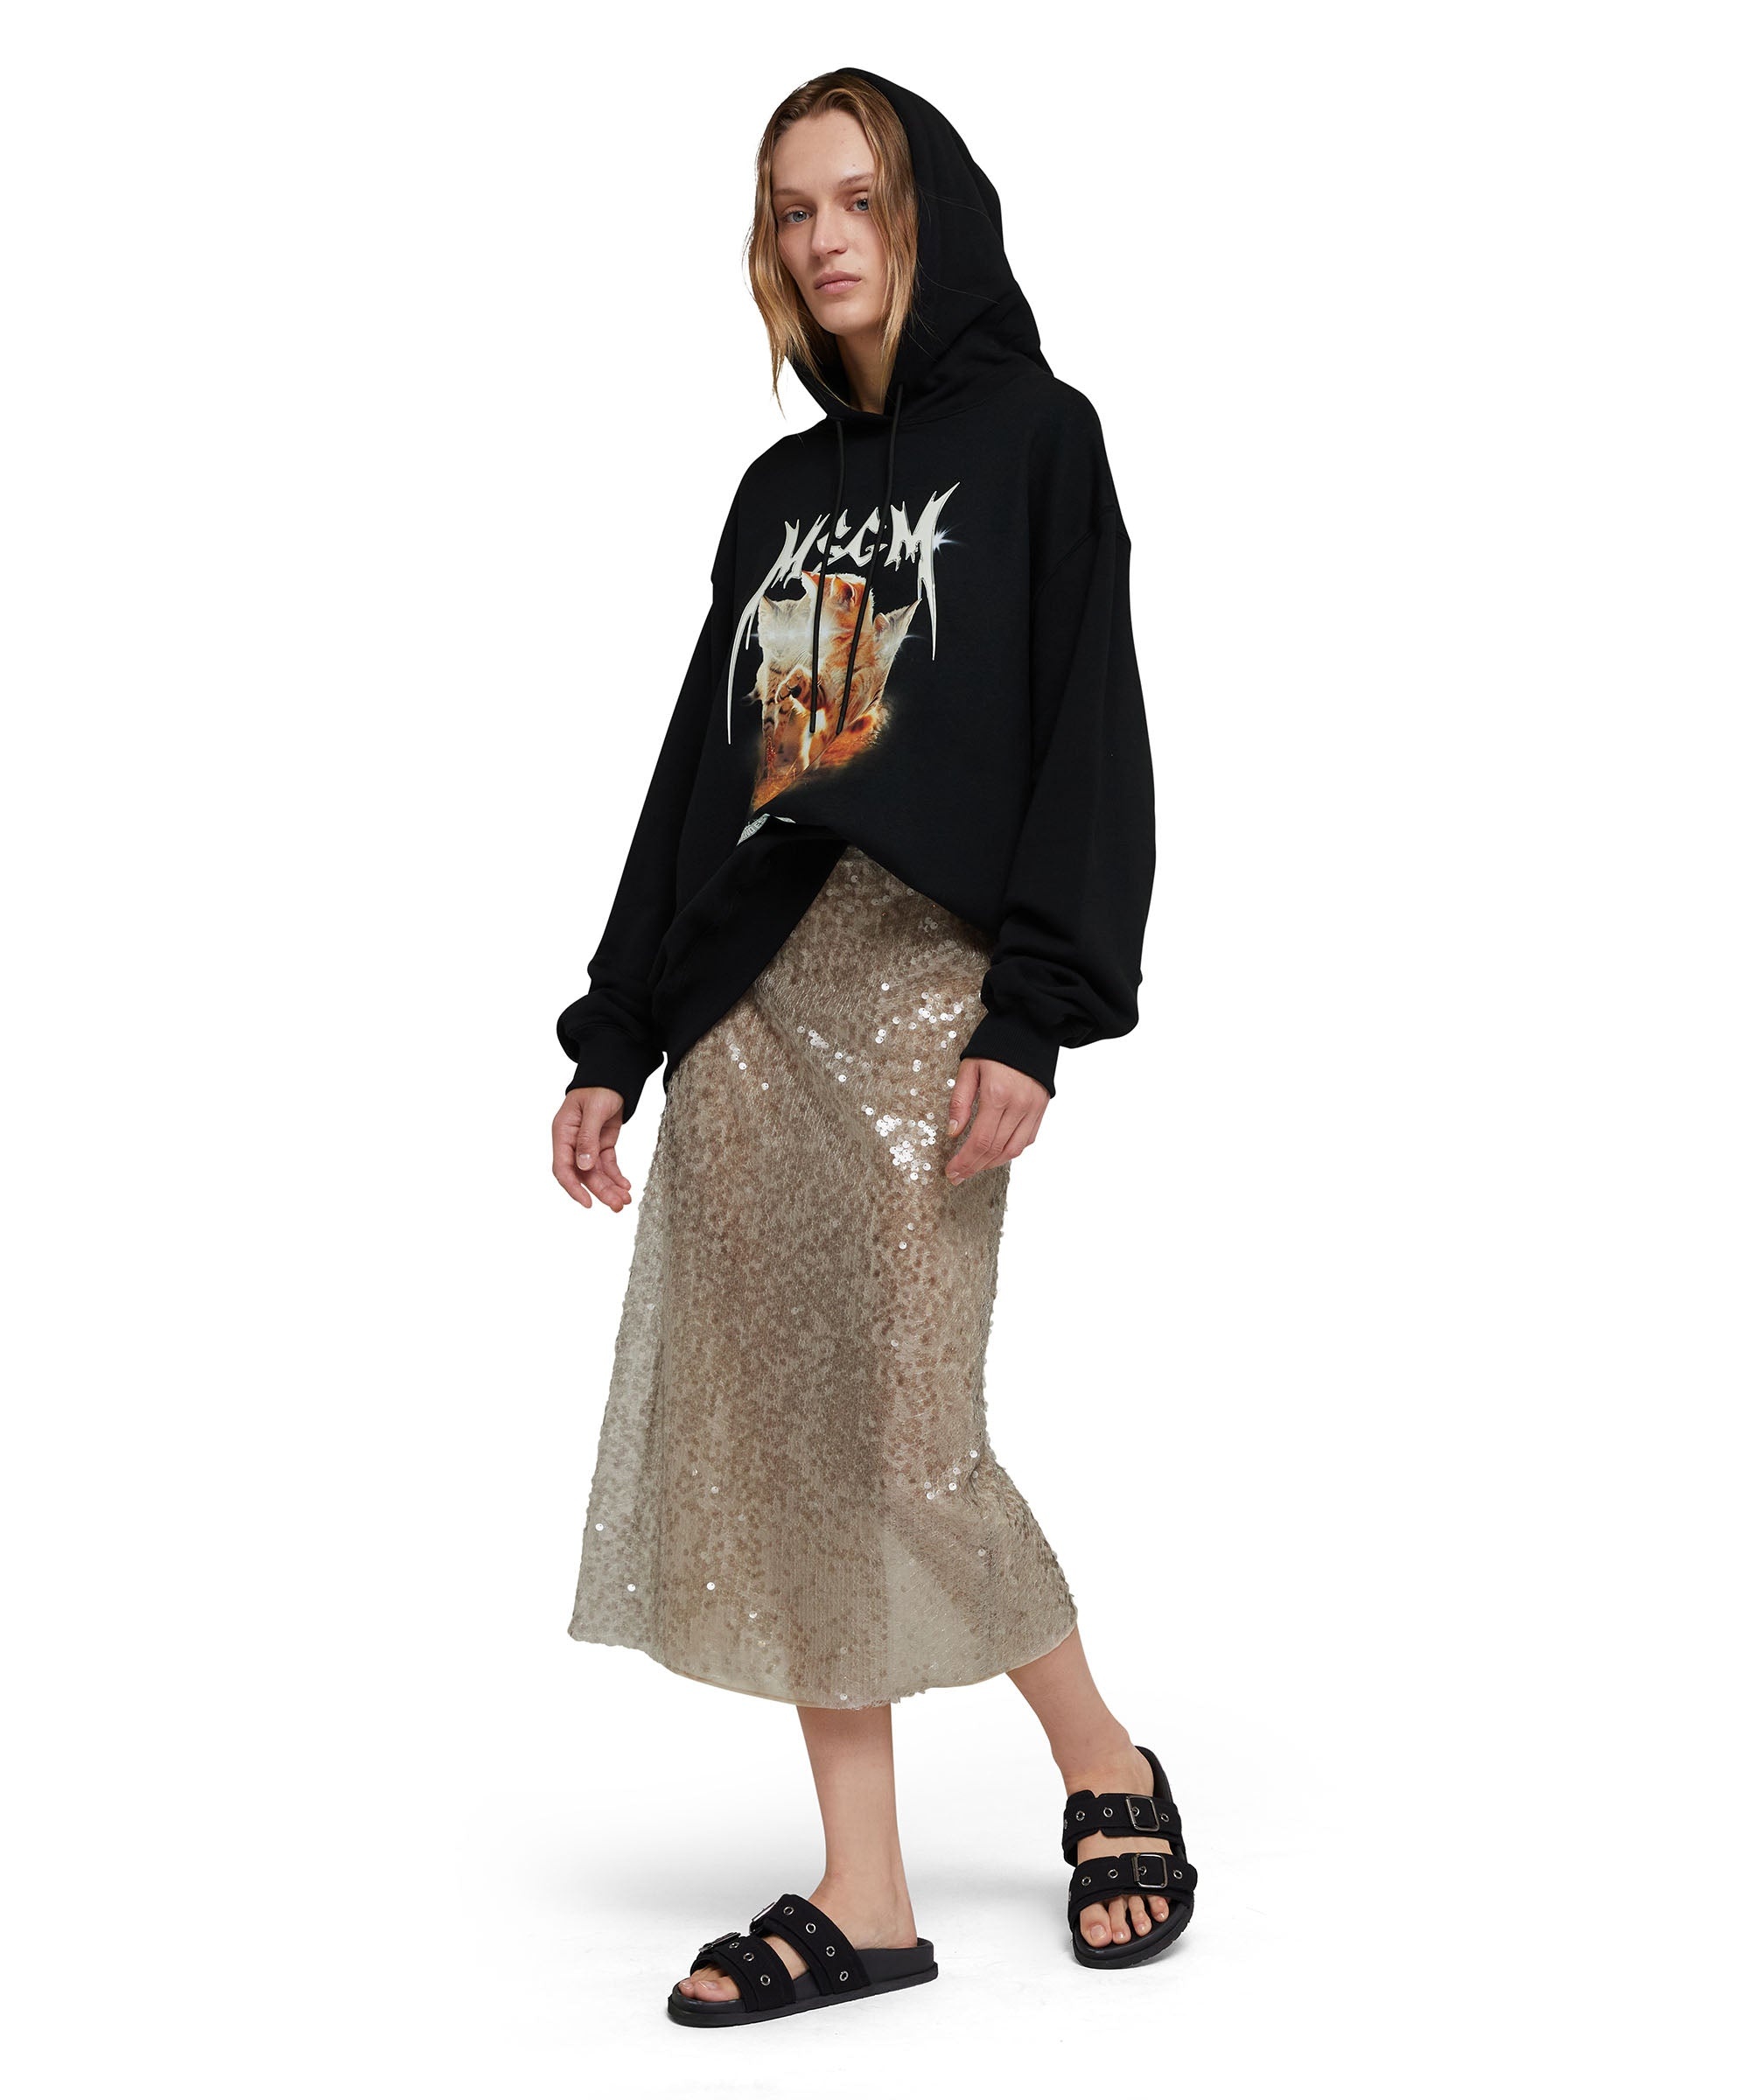 Hooded sweatshirt with "Laser eyed cat" graphic - 5